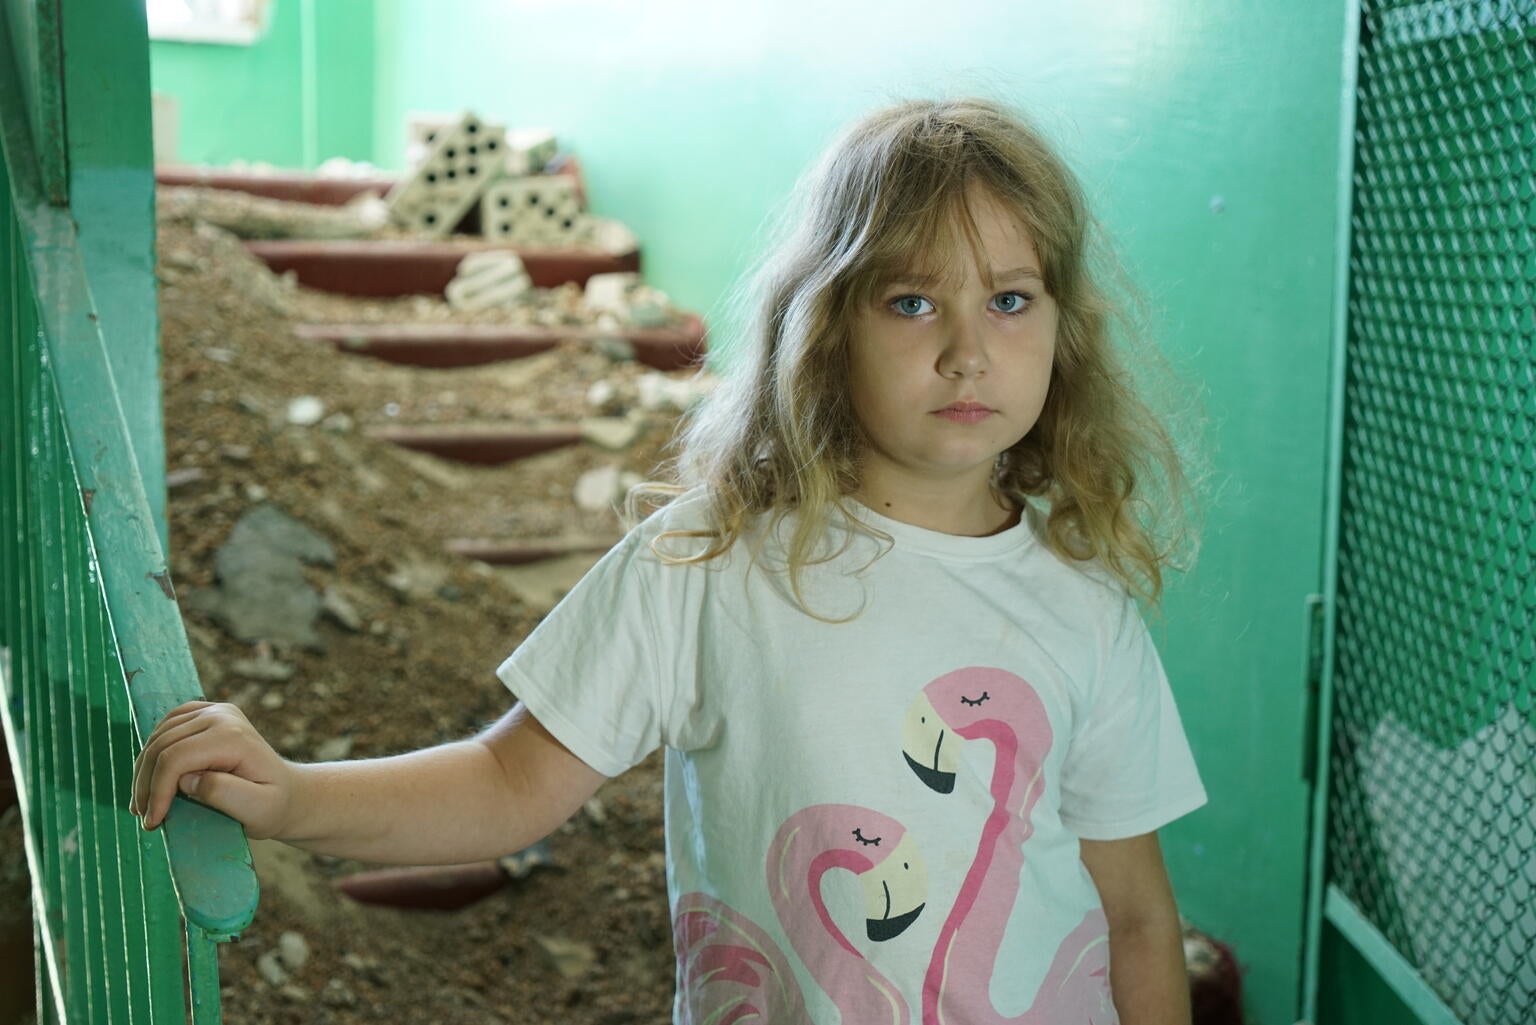 A girl looks at the camera in front of a pile of rubble that used to be her school.